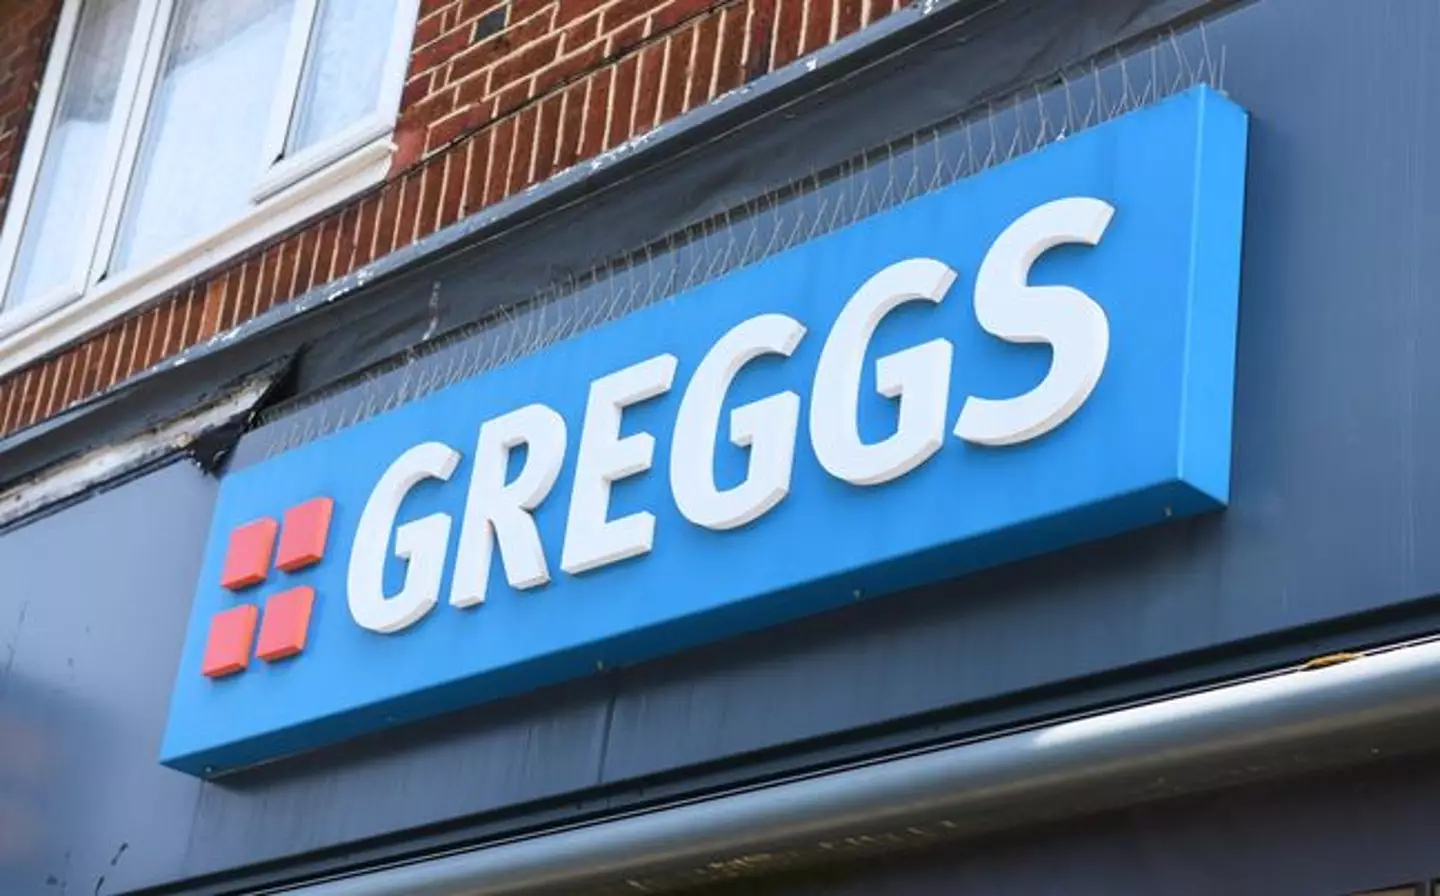 Greggs doesn't serve hot food.